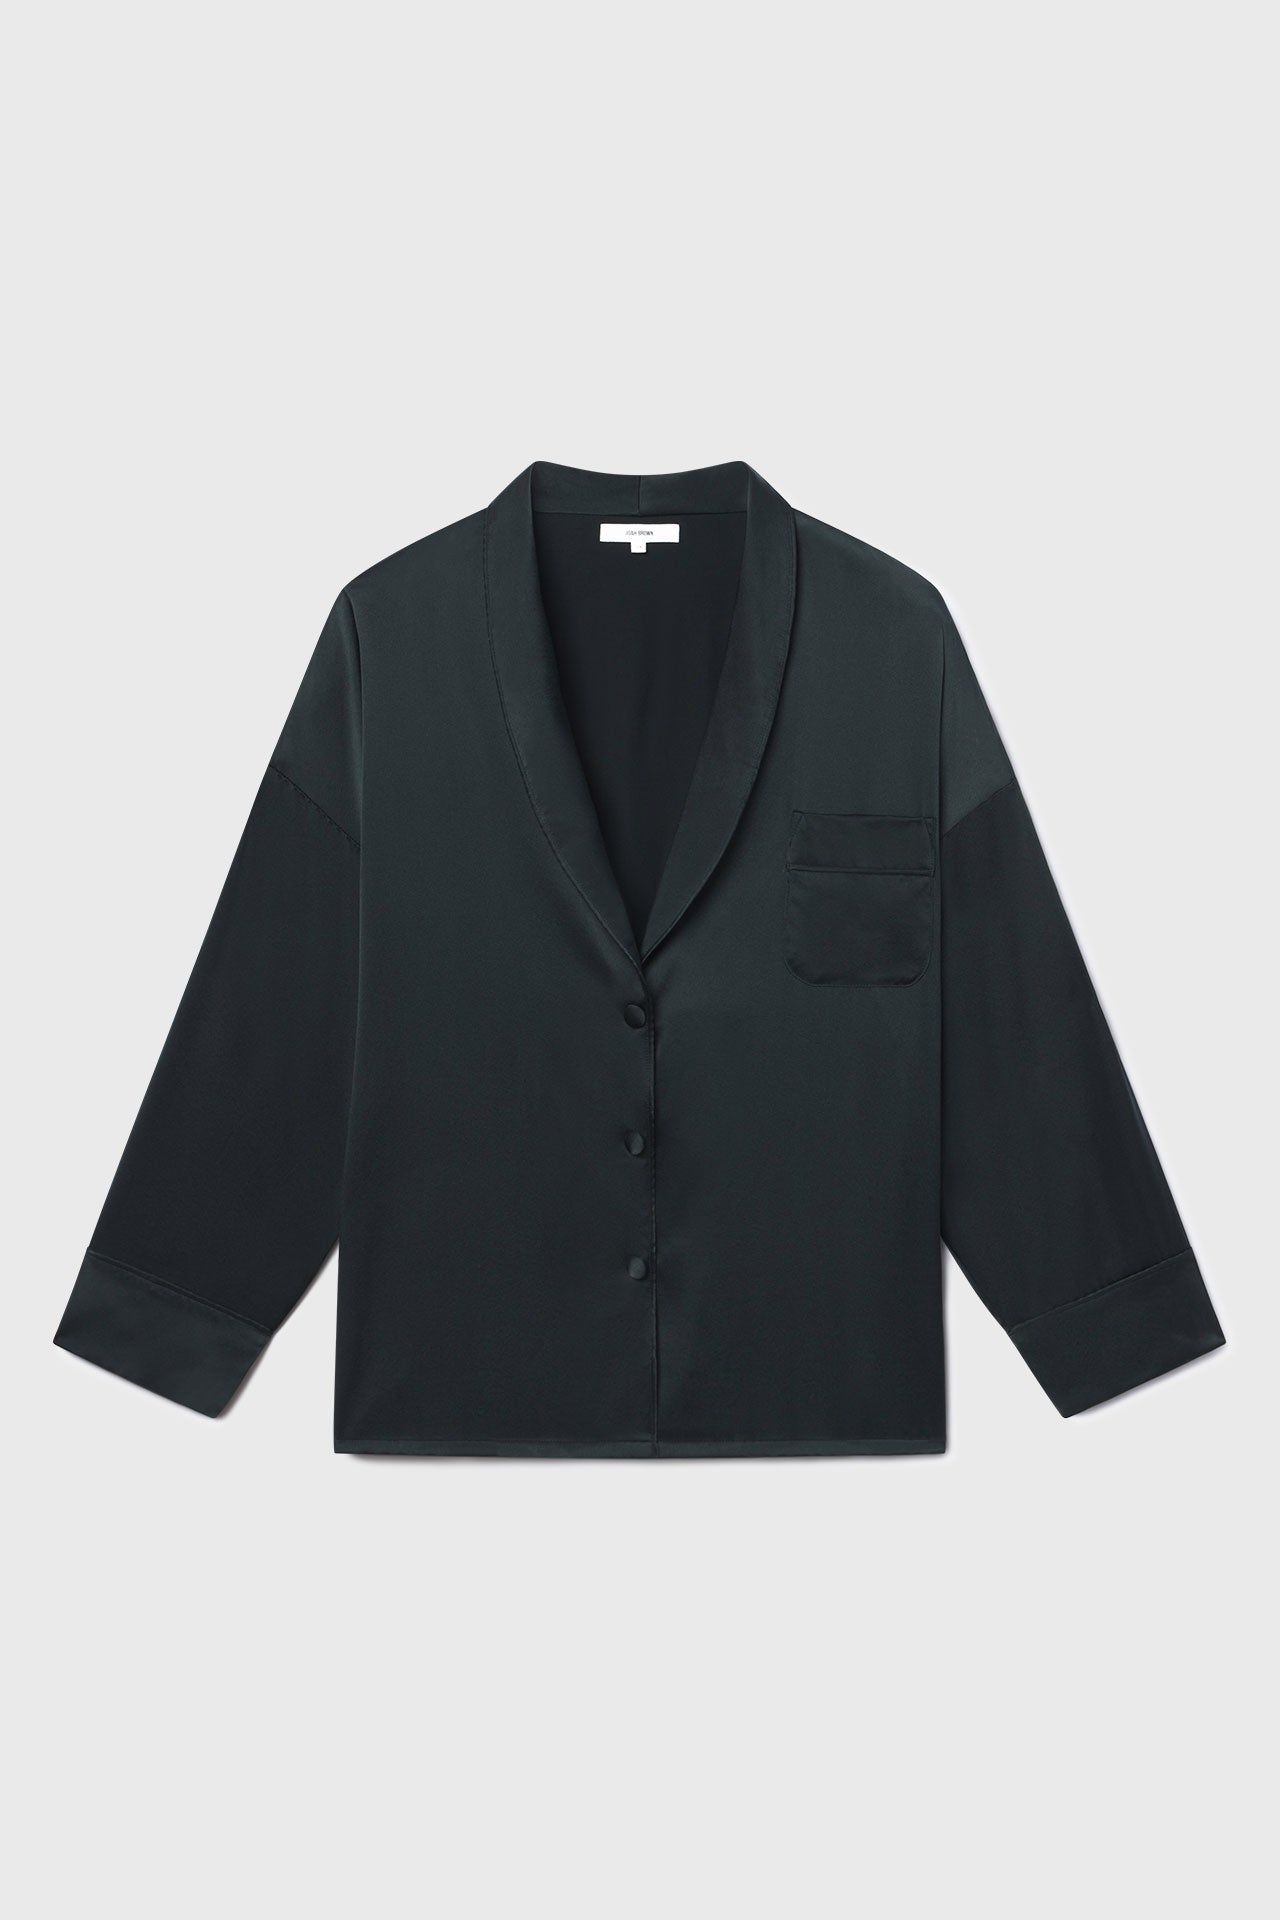 Flat lay front view of the comfortable, relaxed fit midnight Oversized Silk Button Down Long Sleeve top with a low shawl collar, front button closures and a left chest pocket